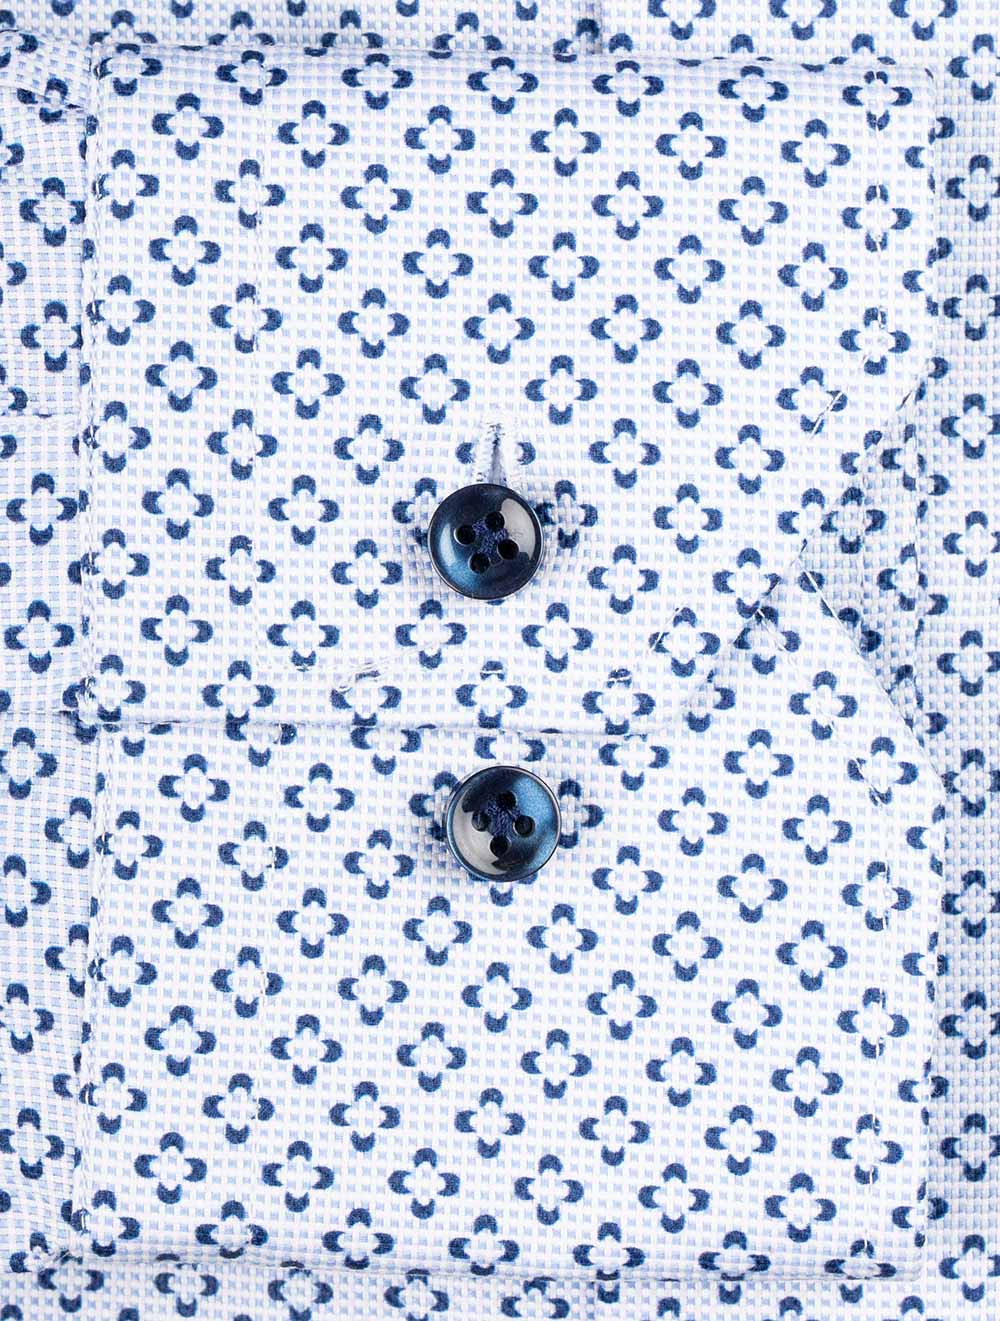 Pattern Single Cuff Shirt With Contrast Buttons Blue